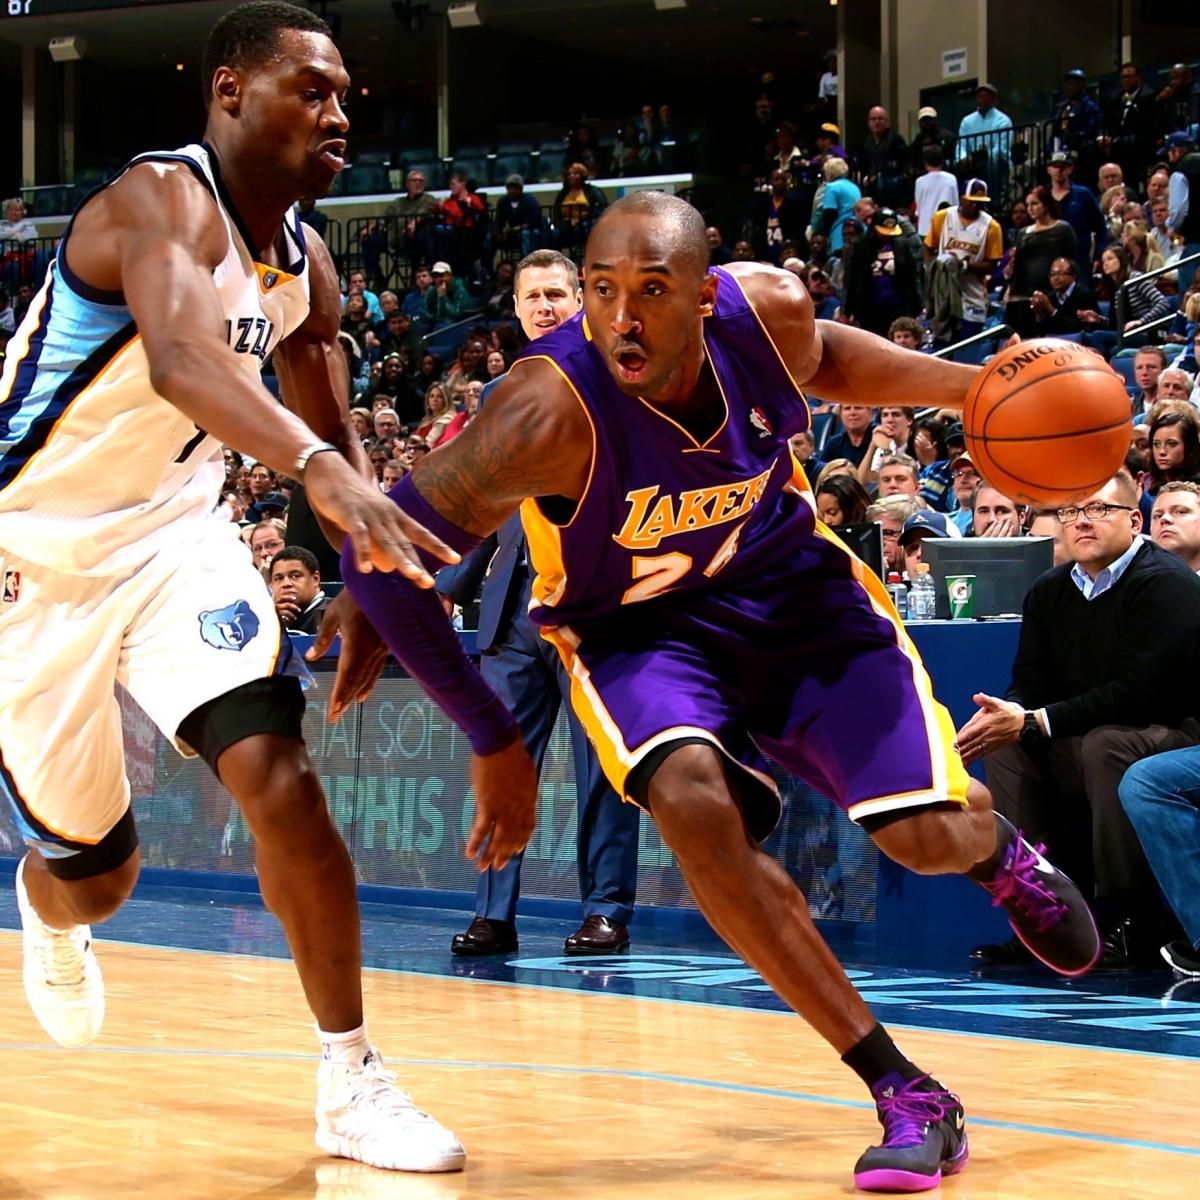 Los Angeles Lakers vs. Memphis Grizzlies Live Score, Highlights and